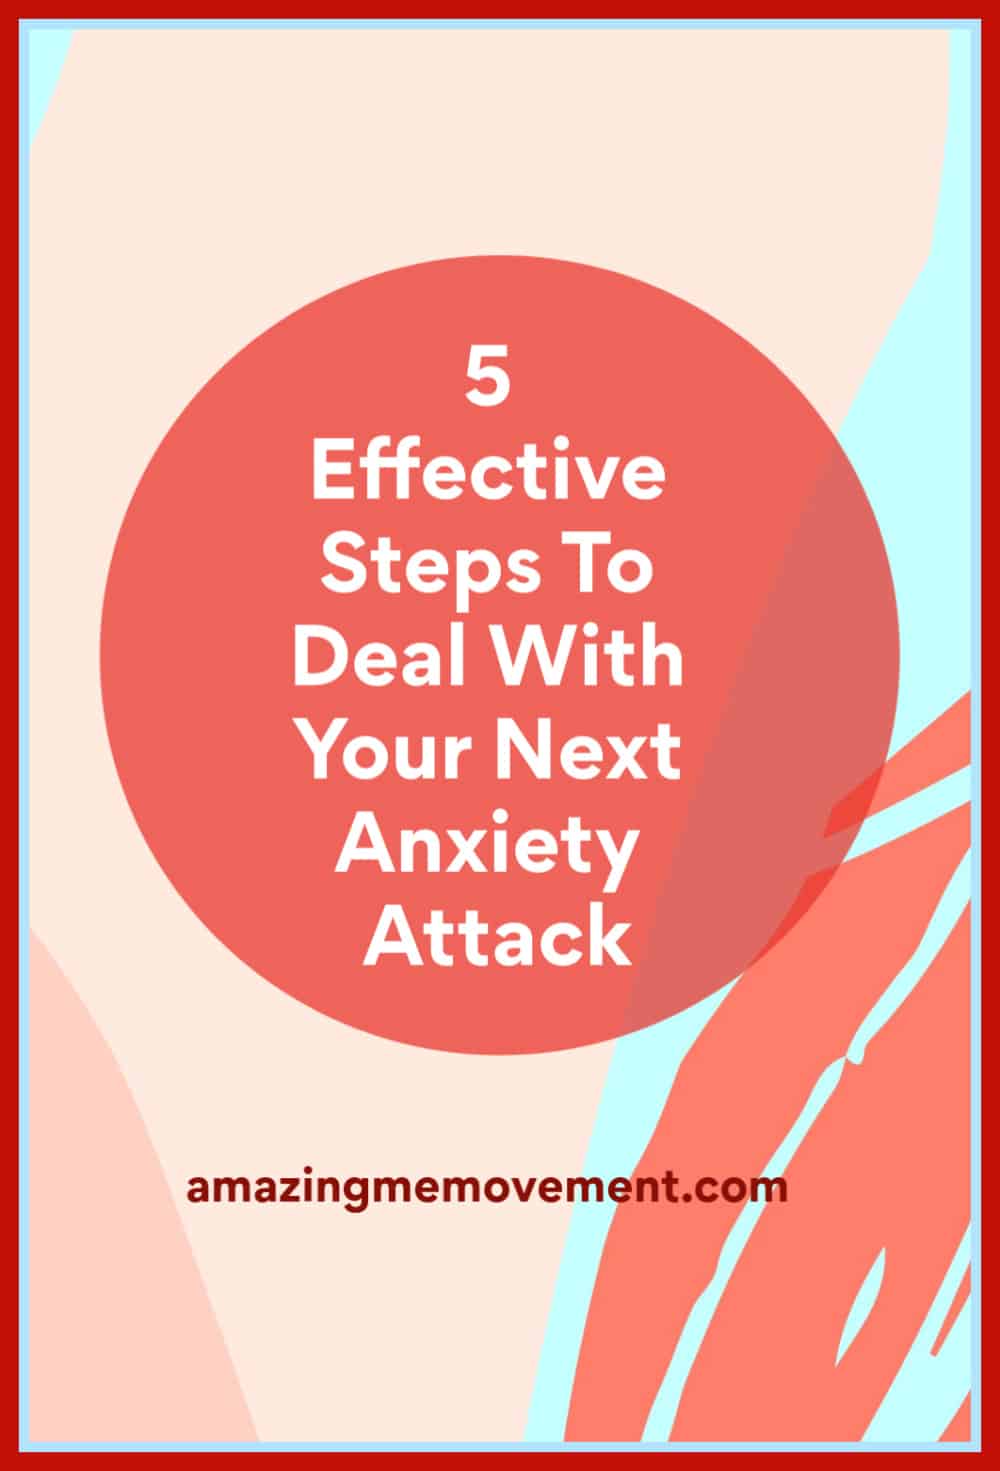 How to overcome anxiety attacks in 5 steps